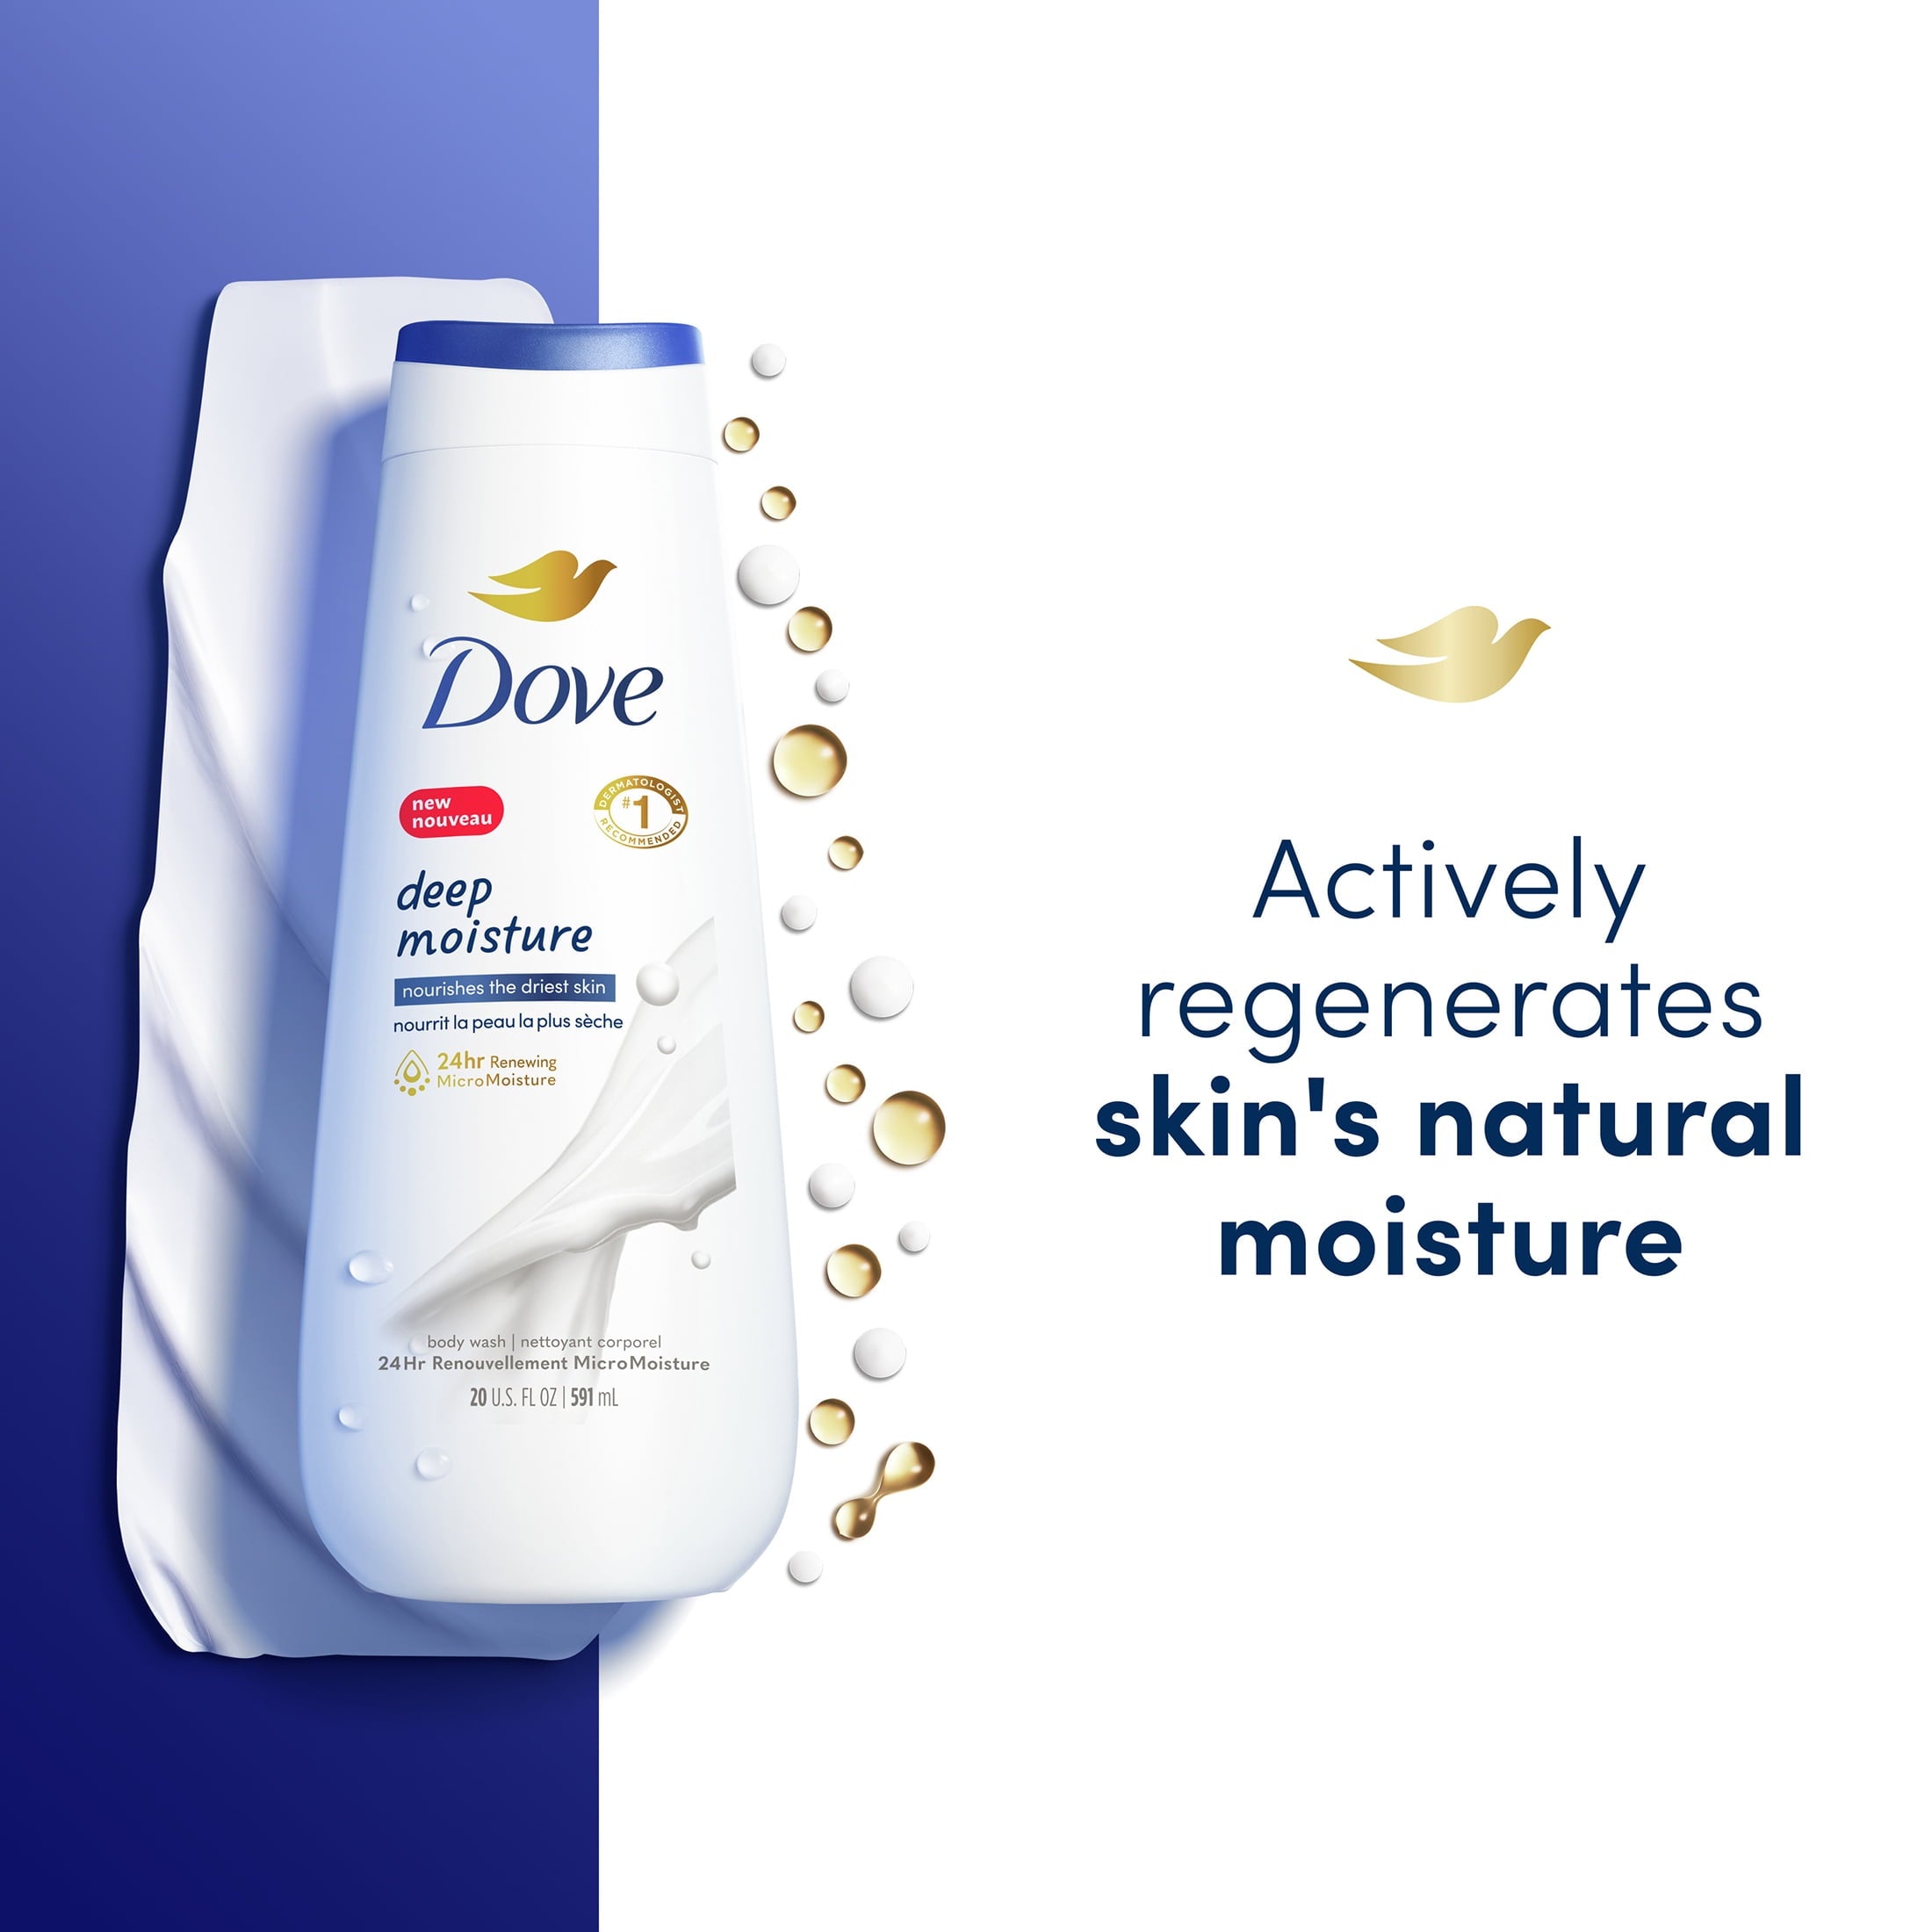 Wholesale prices with free shipping all over United States Dove Deep Moisture Nourishing Liquid Body Wash, 20 oz, 2 Count - Steven Deals